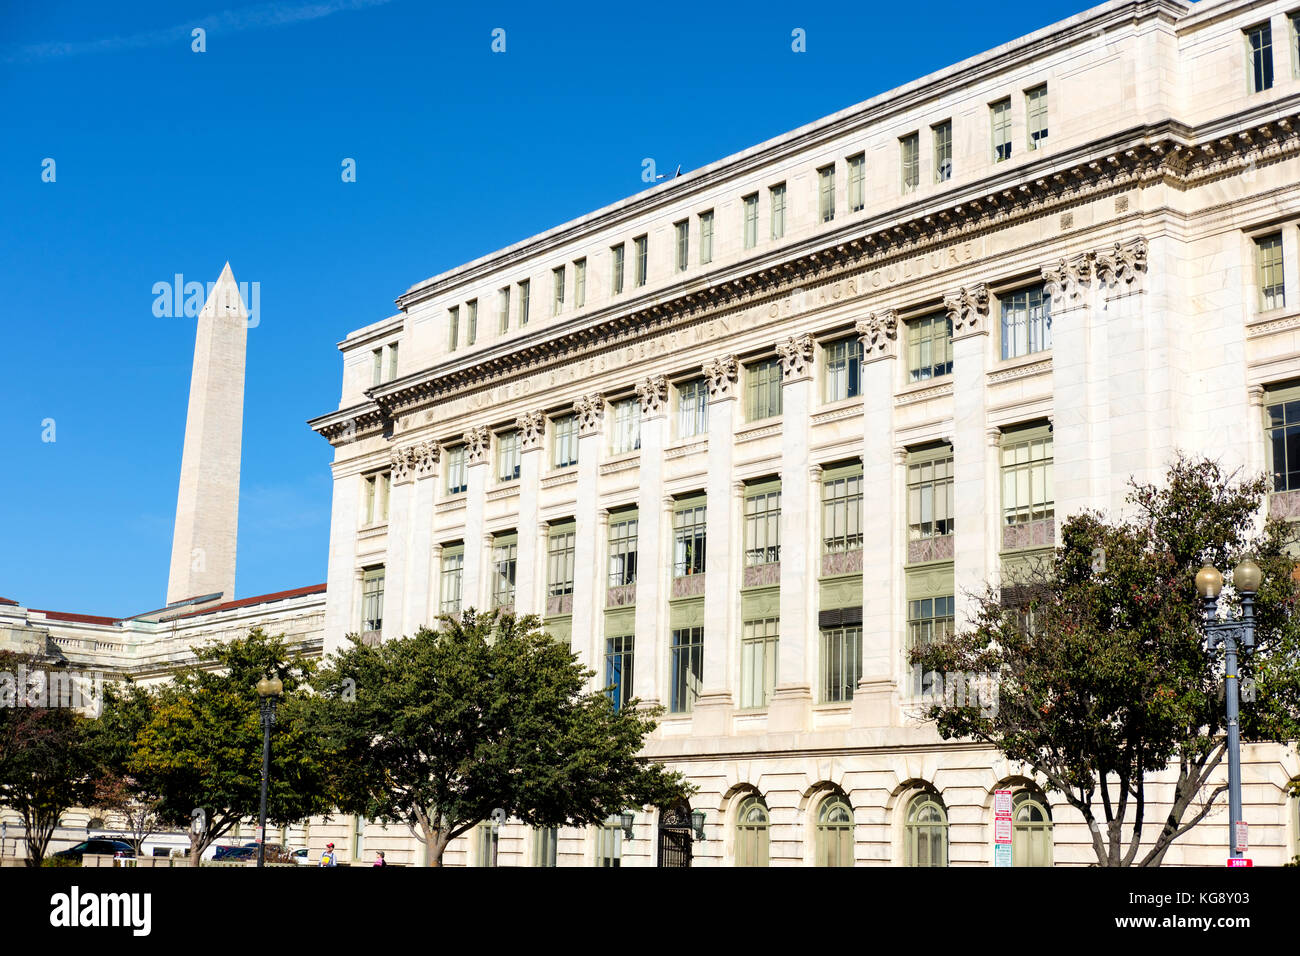 US Department of Agriculture building exterior view, Washington, DC, United States of America, USA. Stock Photo